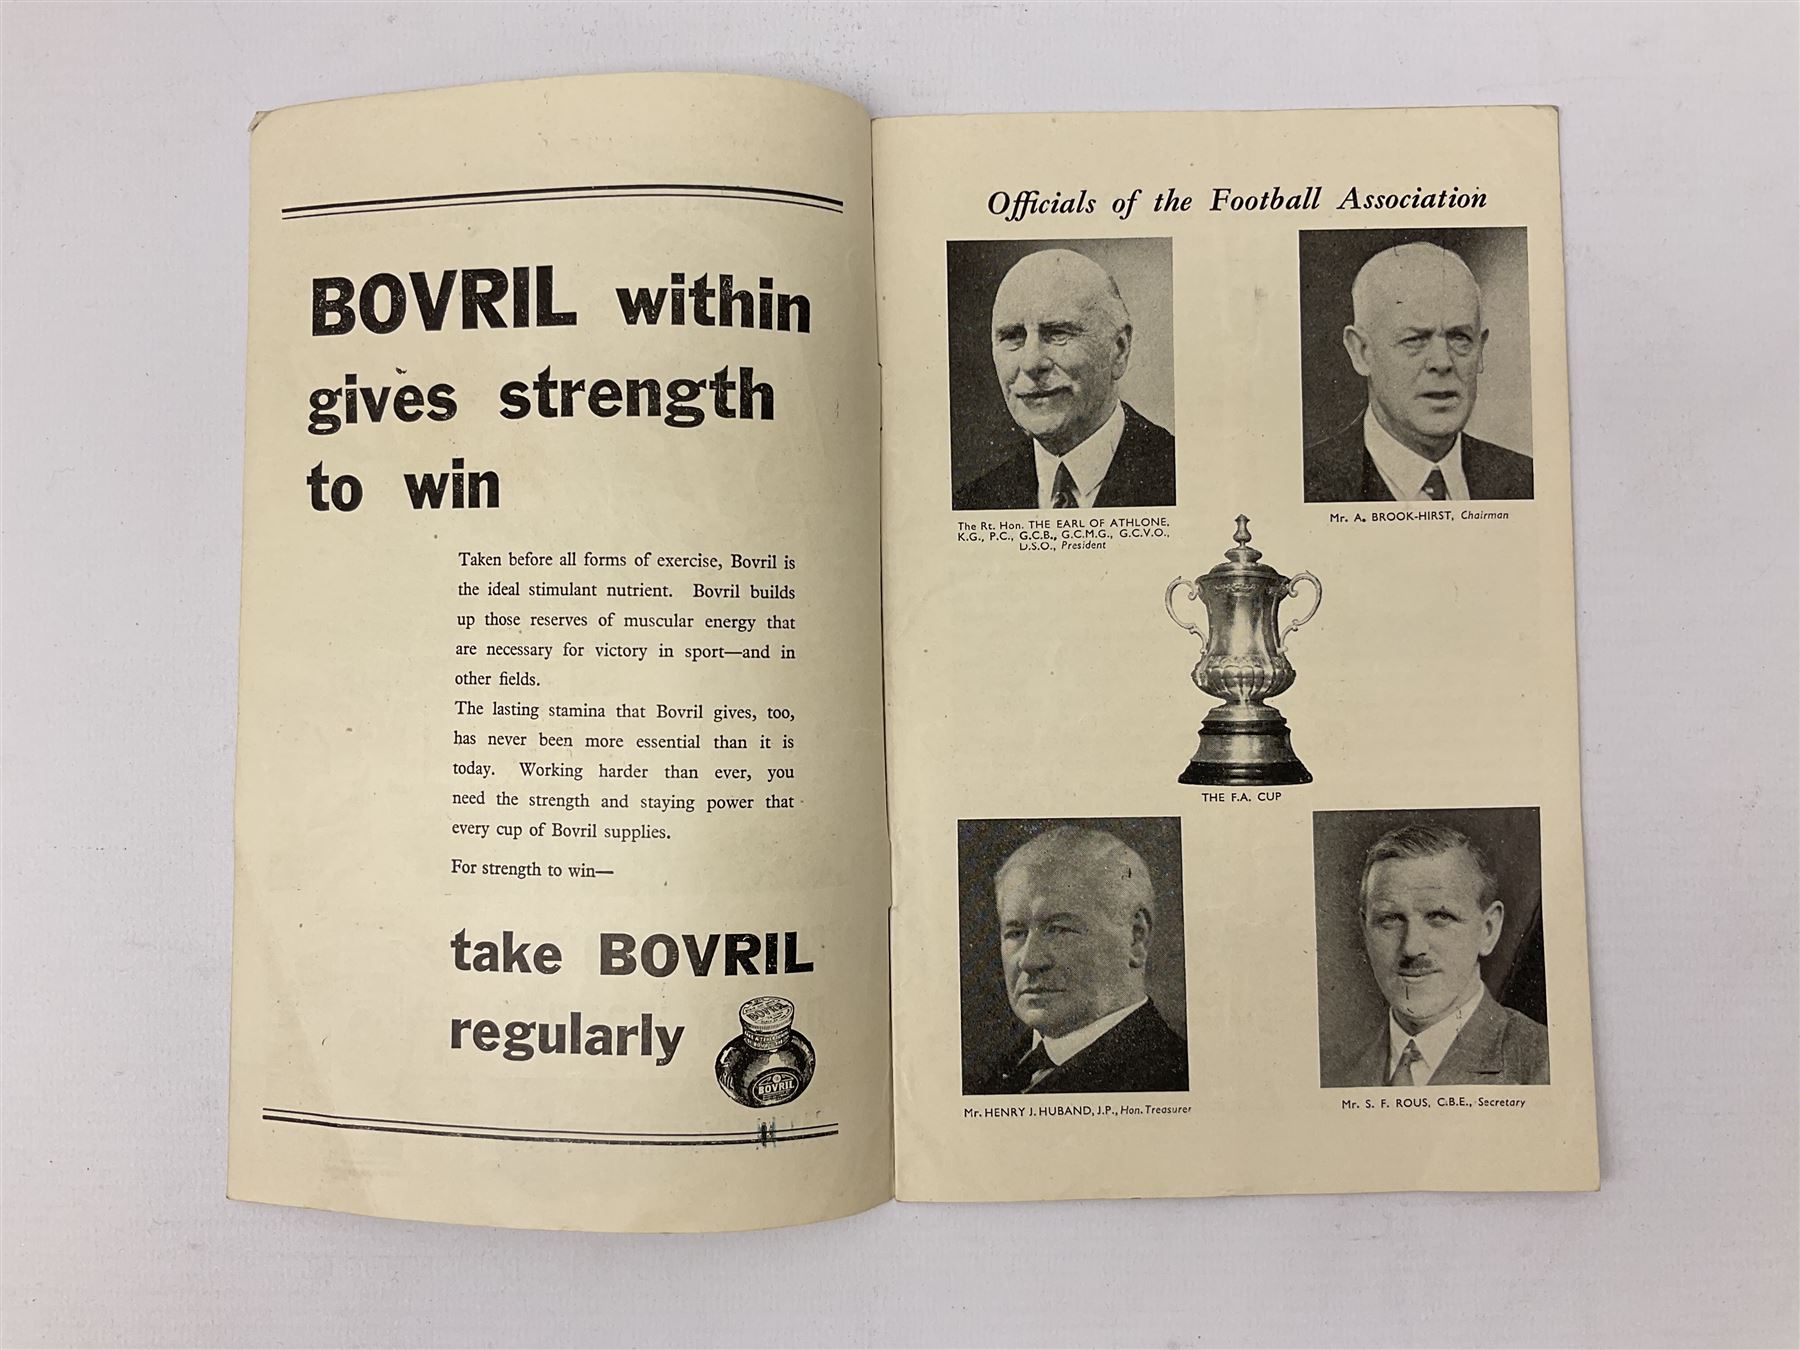 1946 FA Cup Final Charlton Athletic v Derby County football programme played 27th April 1946 at Wemb - Image 3 of 9